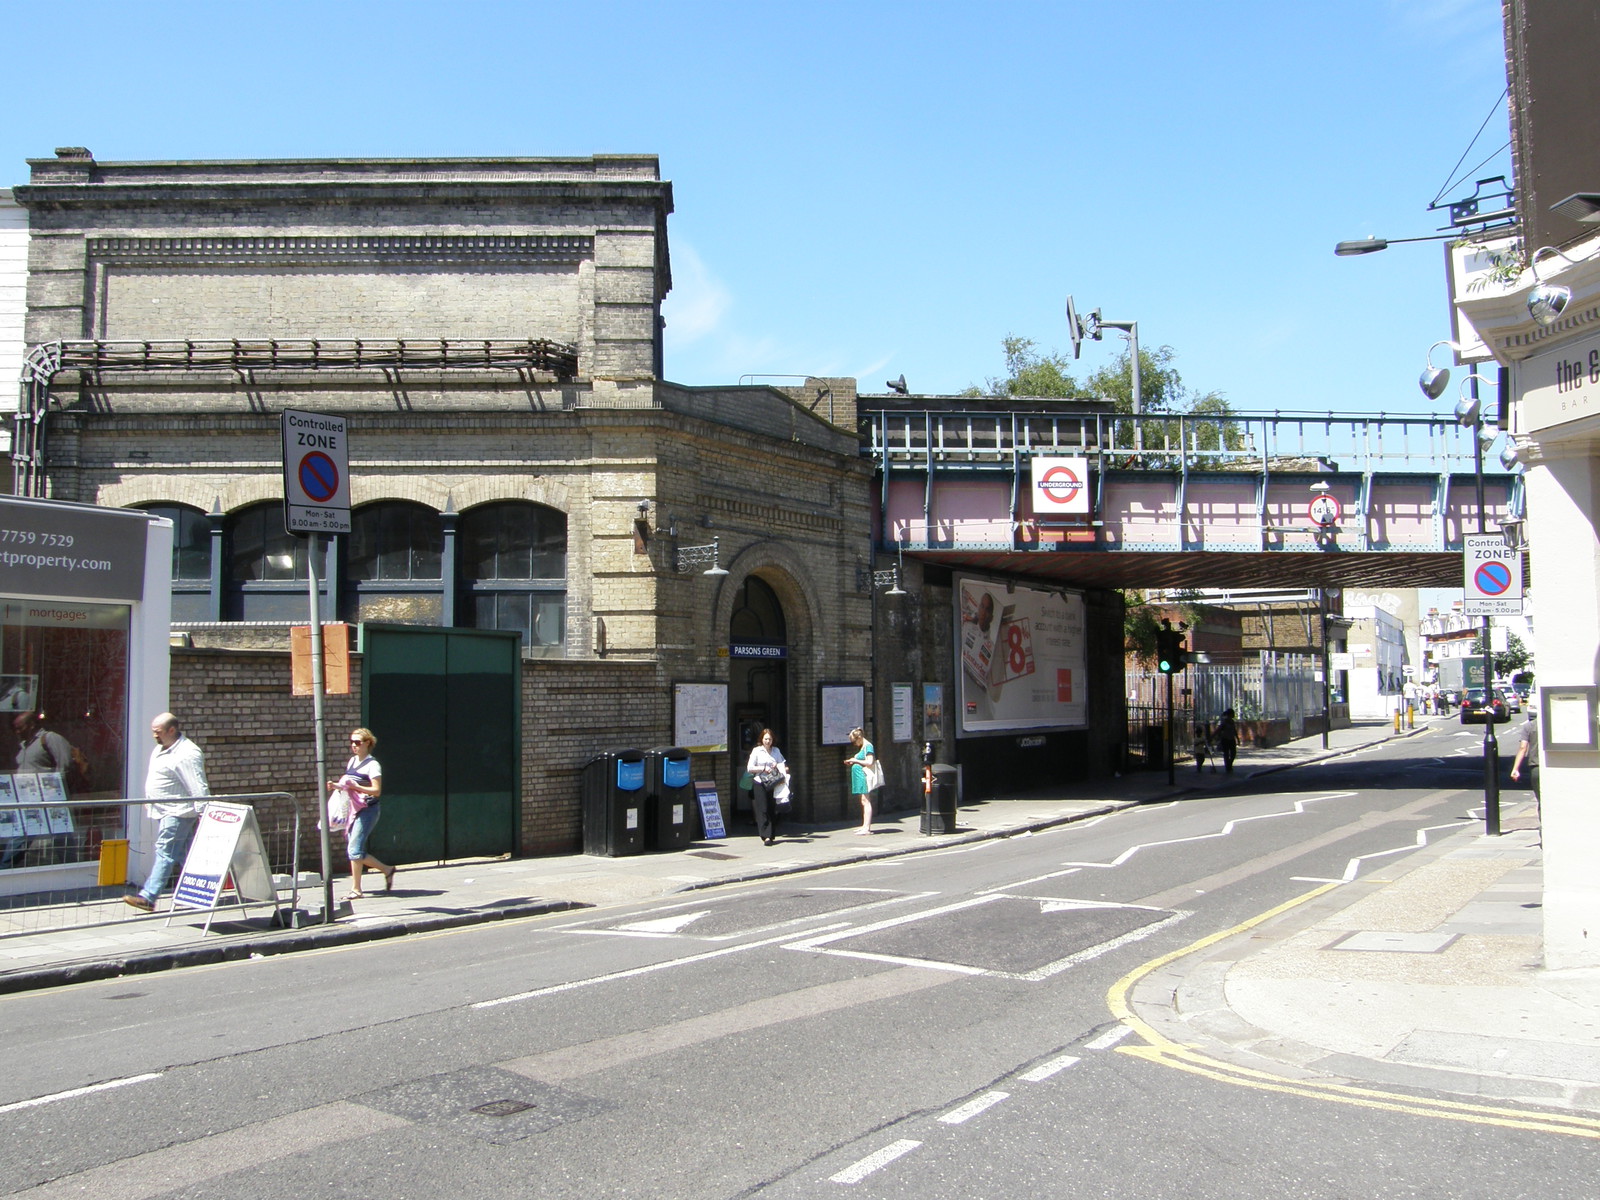 Parsons Green station